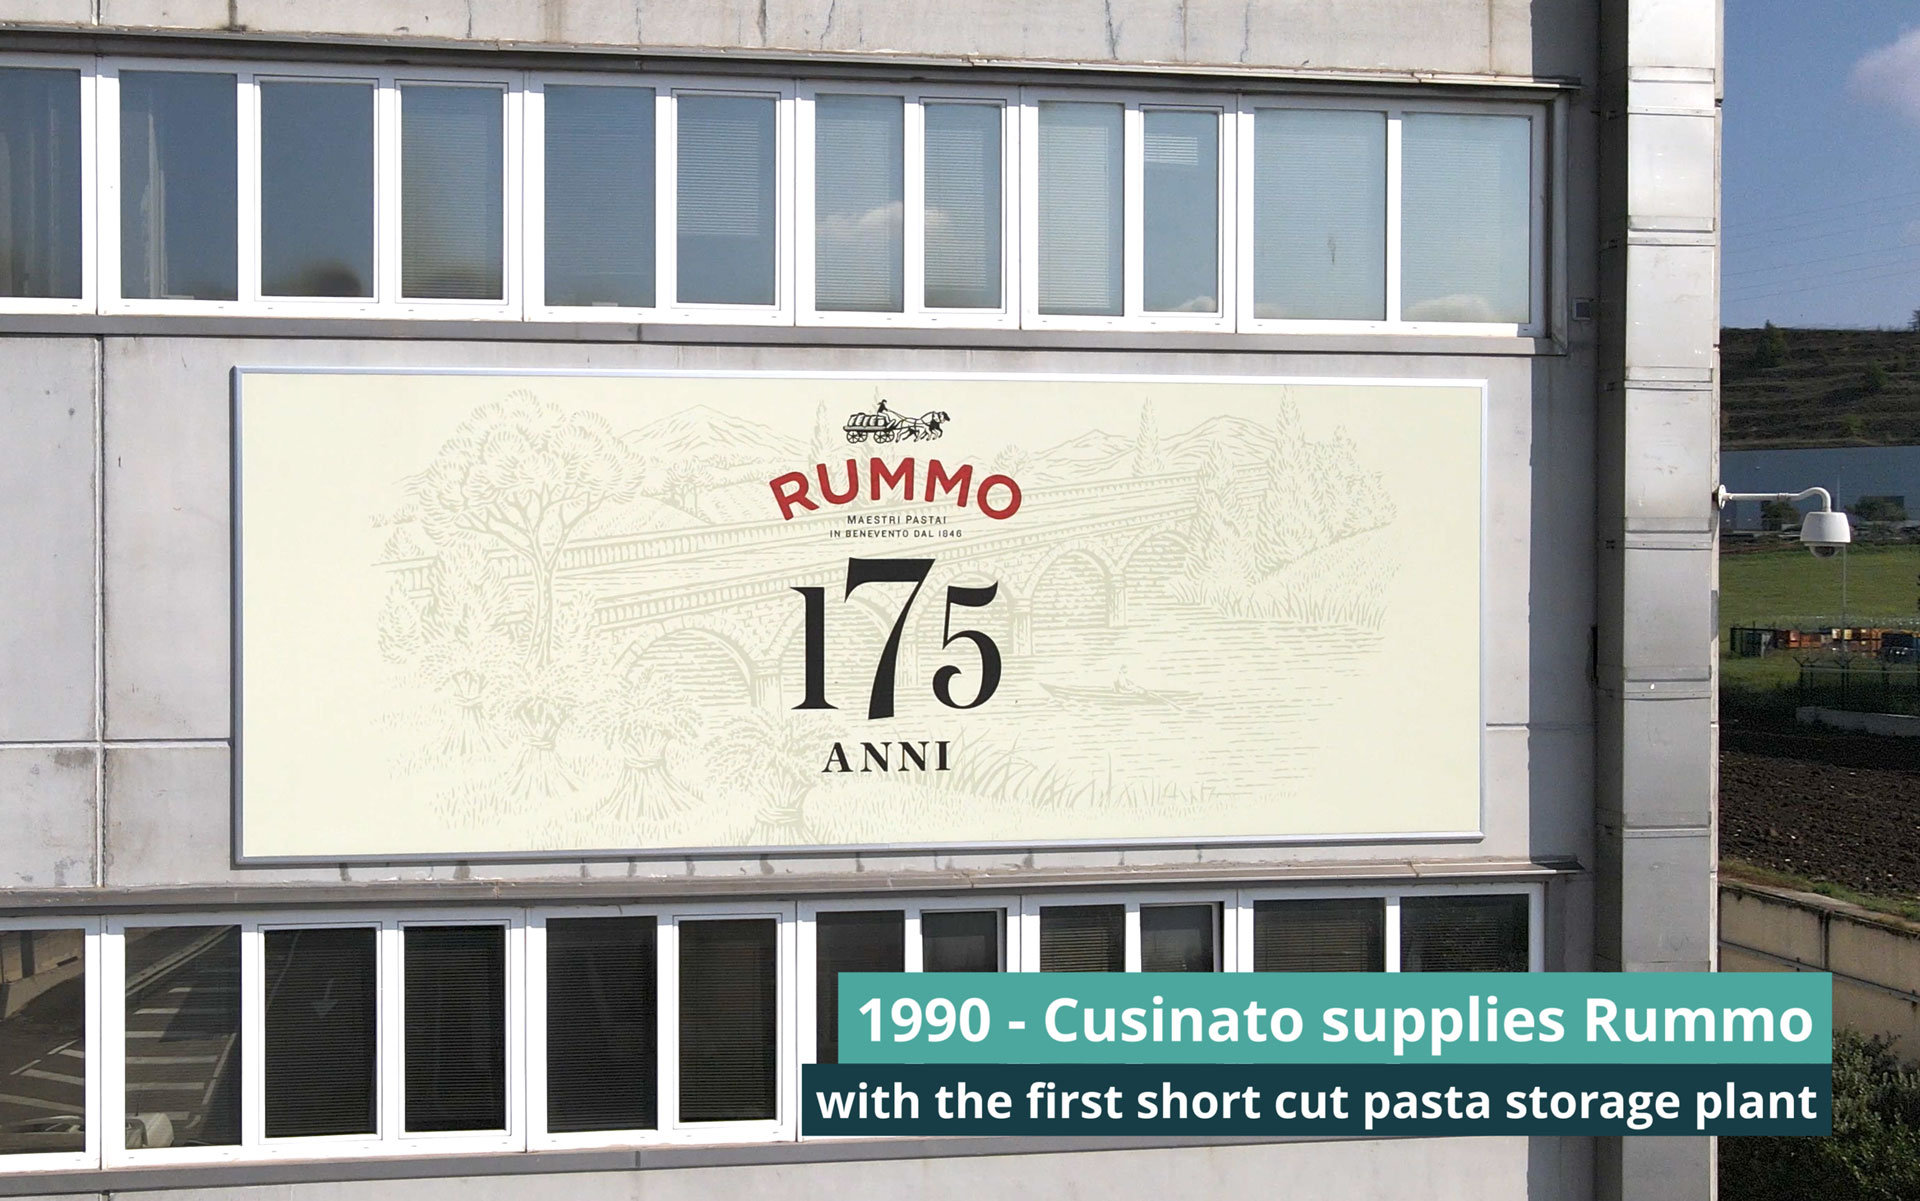 Business between the Rummo pasta factory and Cusinato has been strengthened